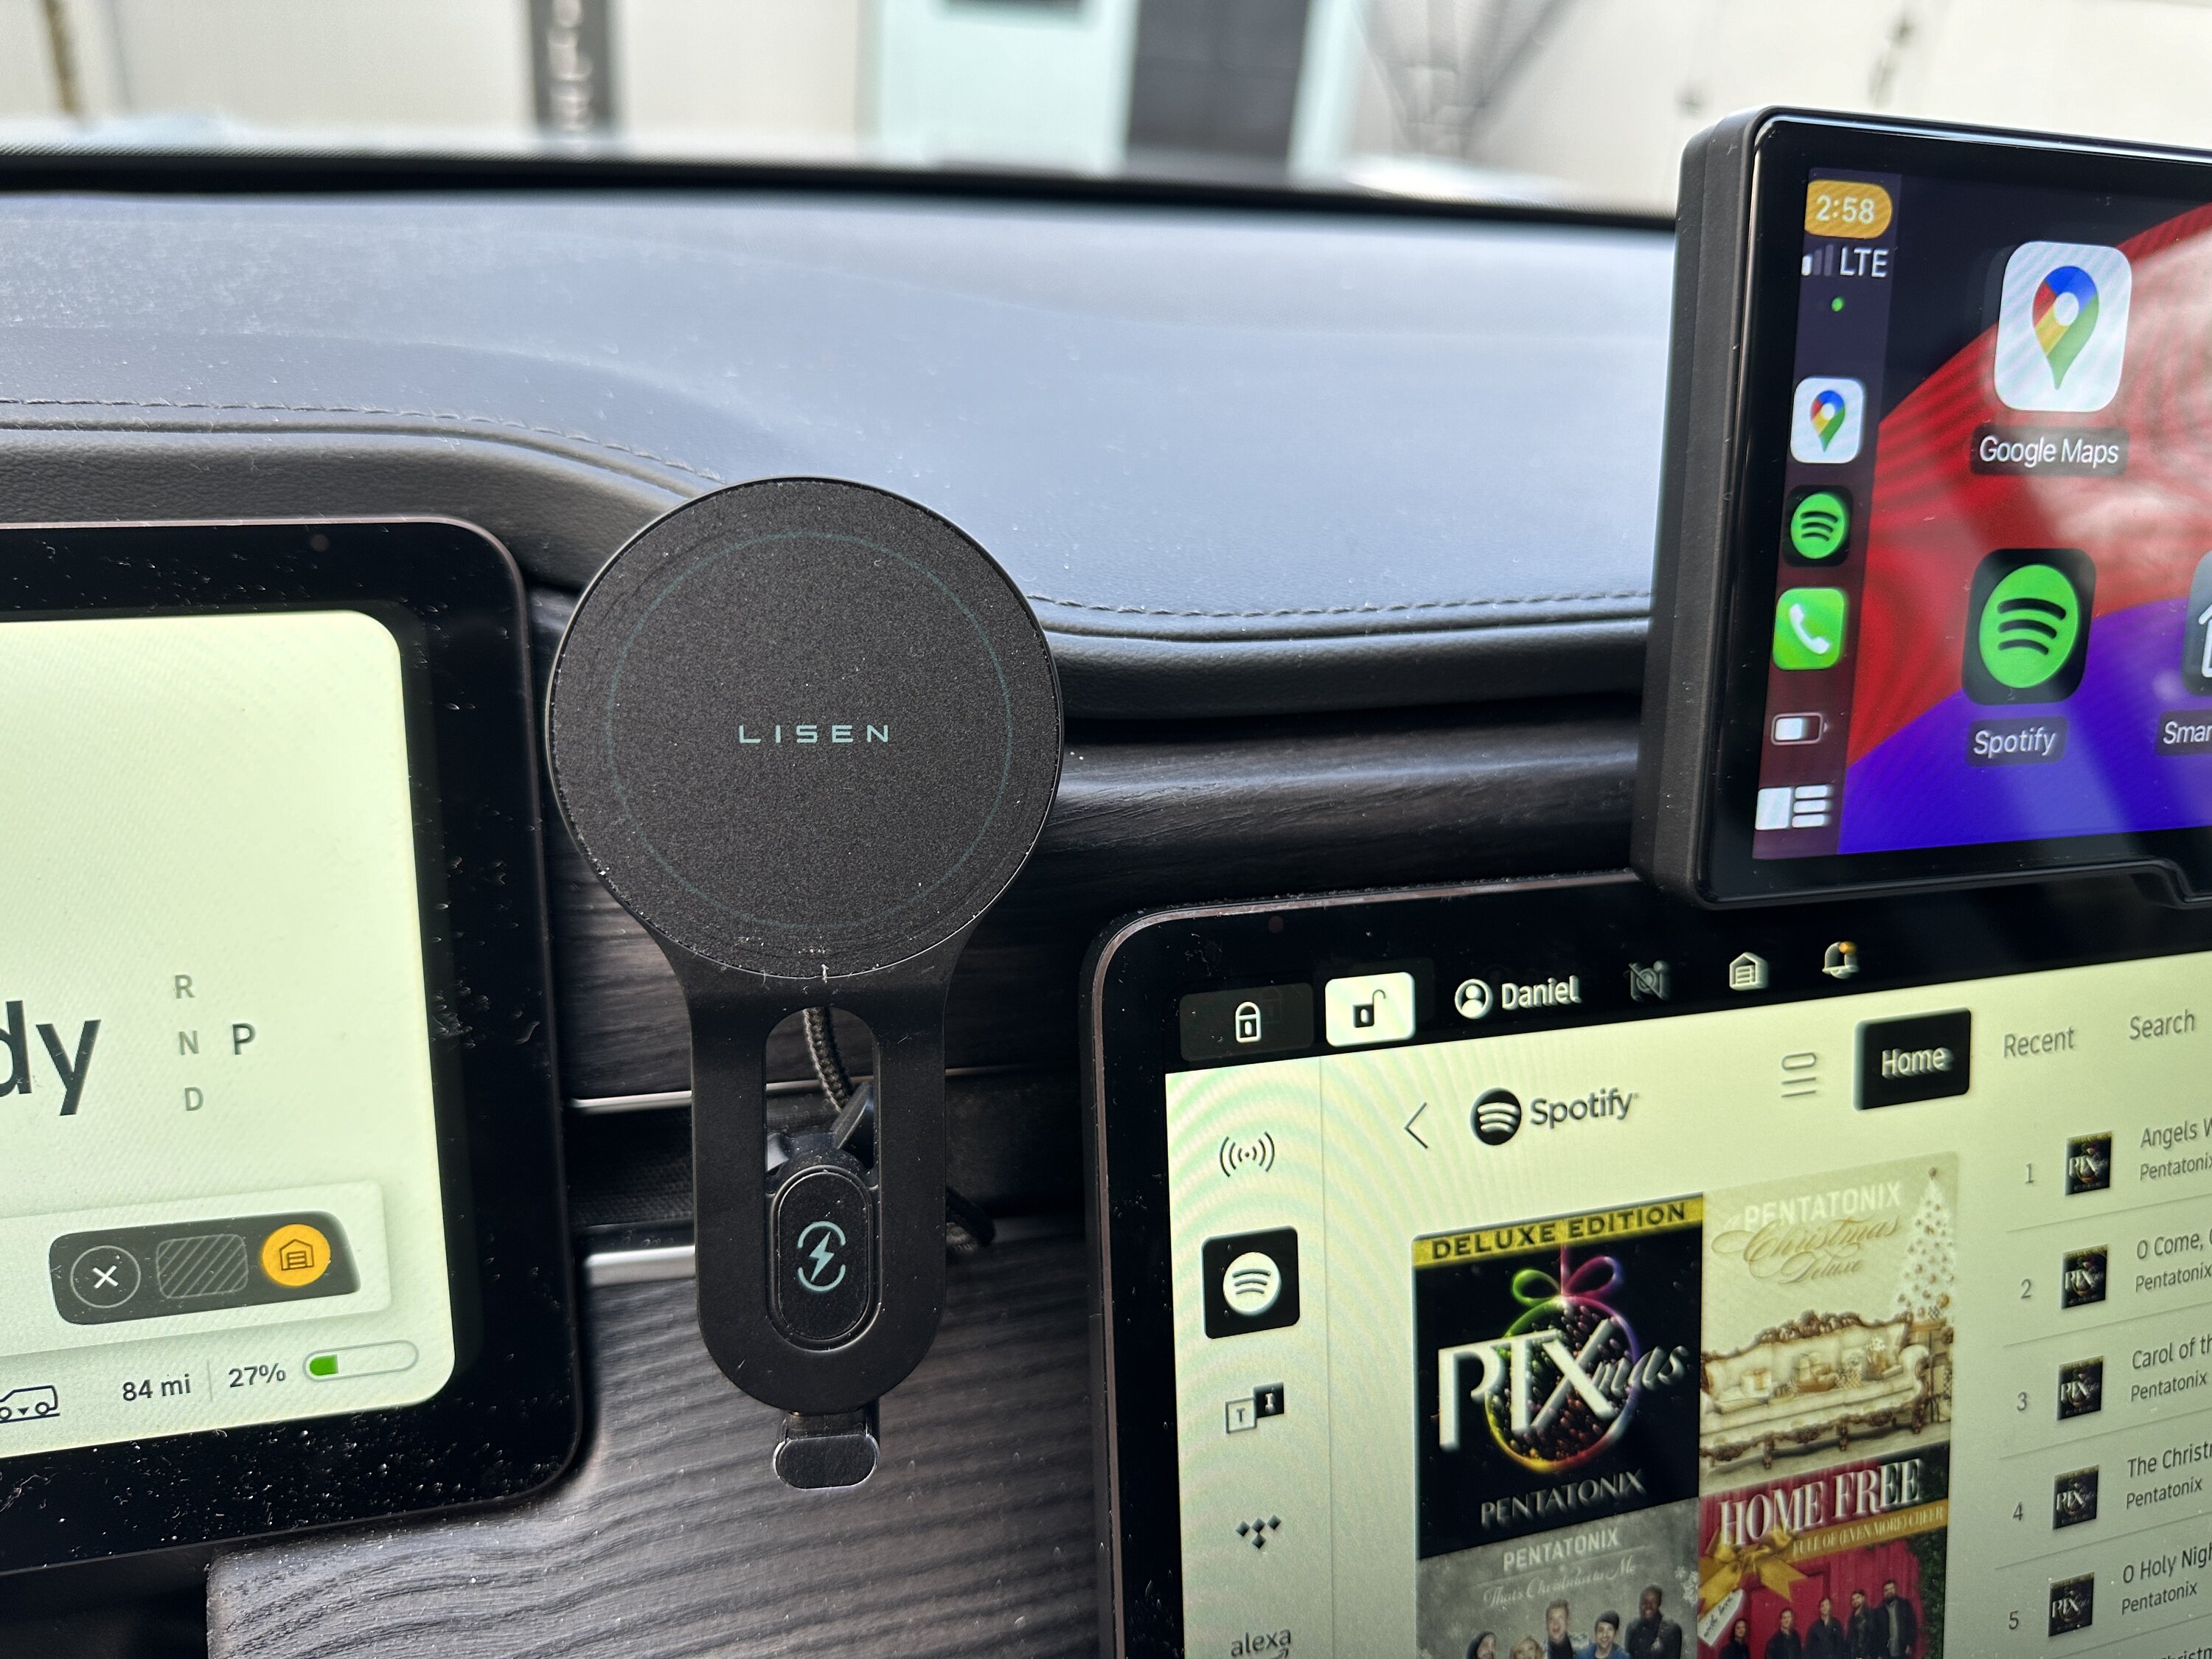 Rivian R1T R1S CarPlay & Android Auto Smart Dash Screen has arrived!  New from EVSportline.com IMG_8922